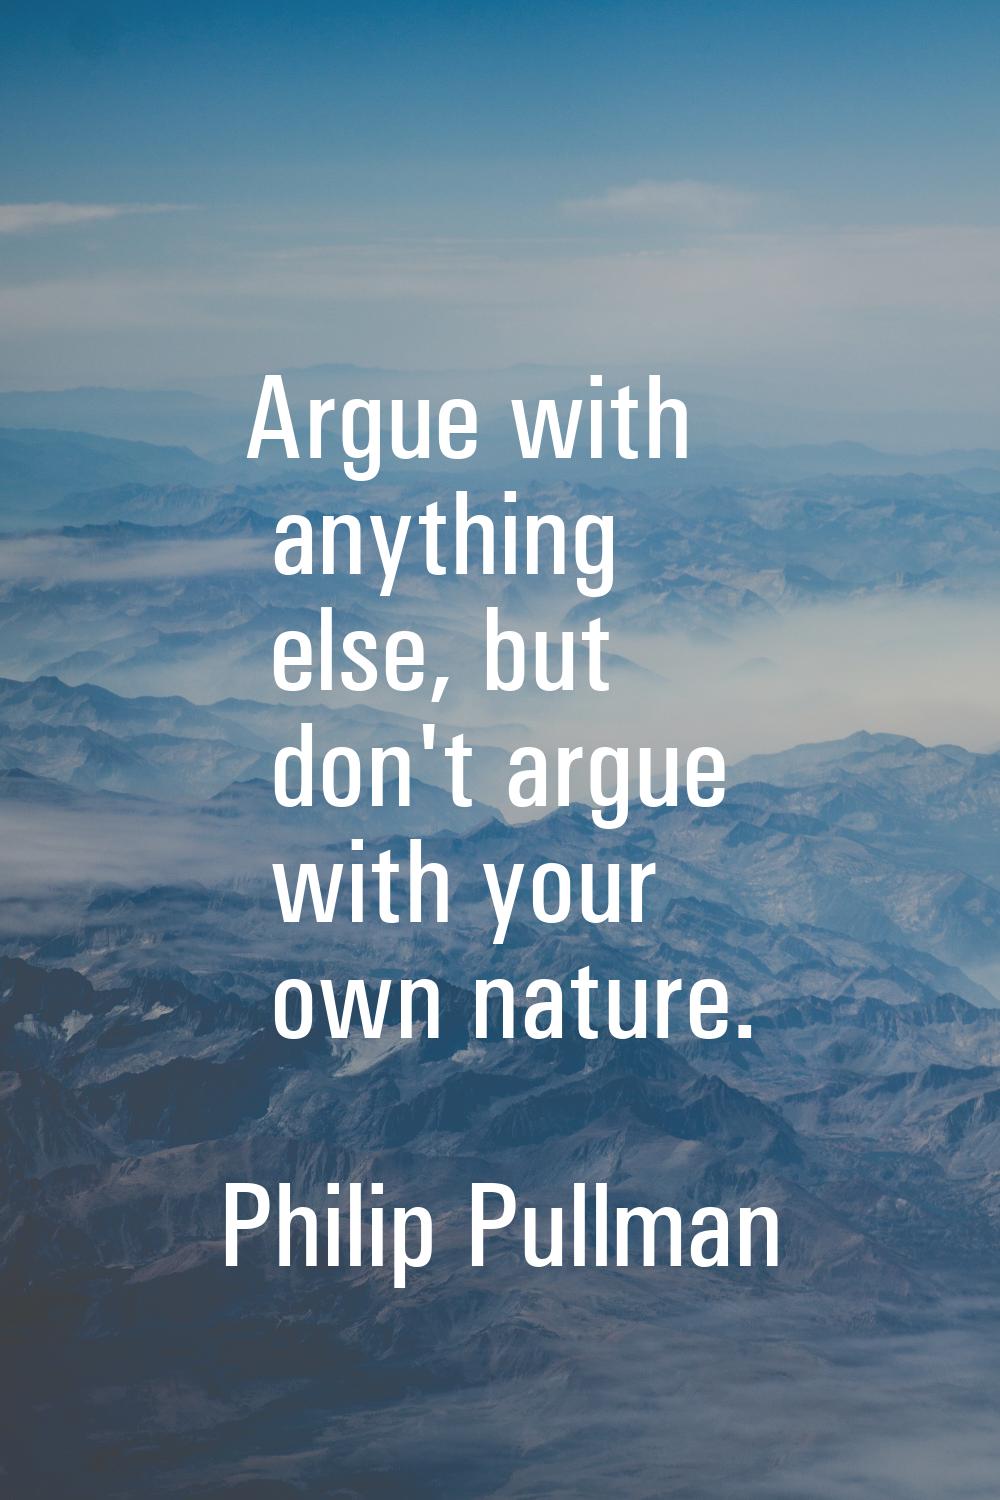 Argue with anything else, but don't argue with your own nature.